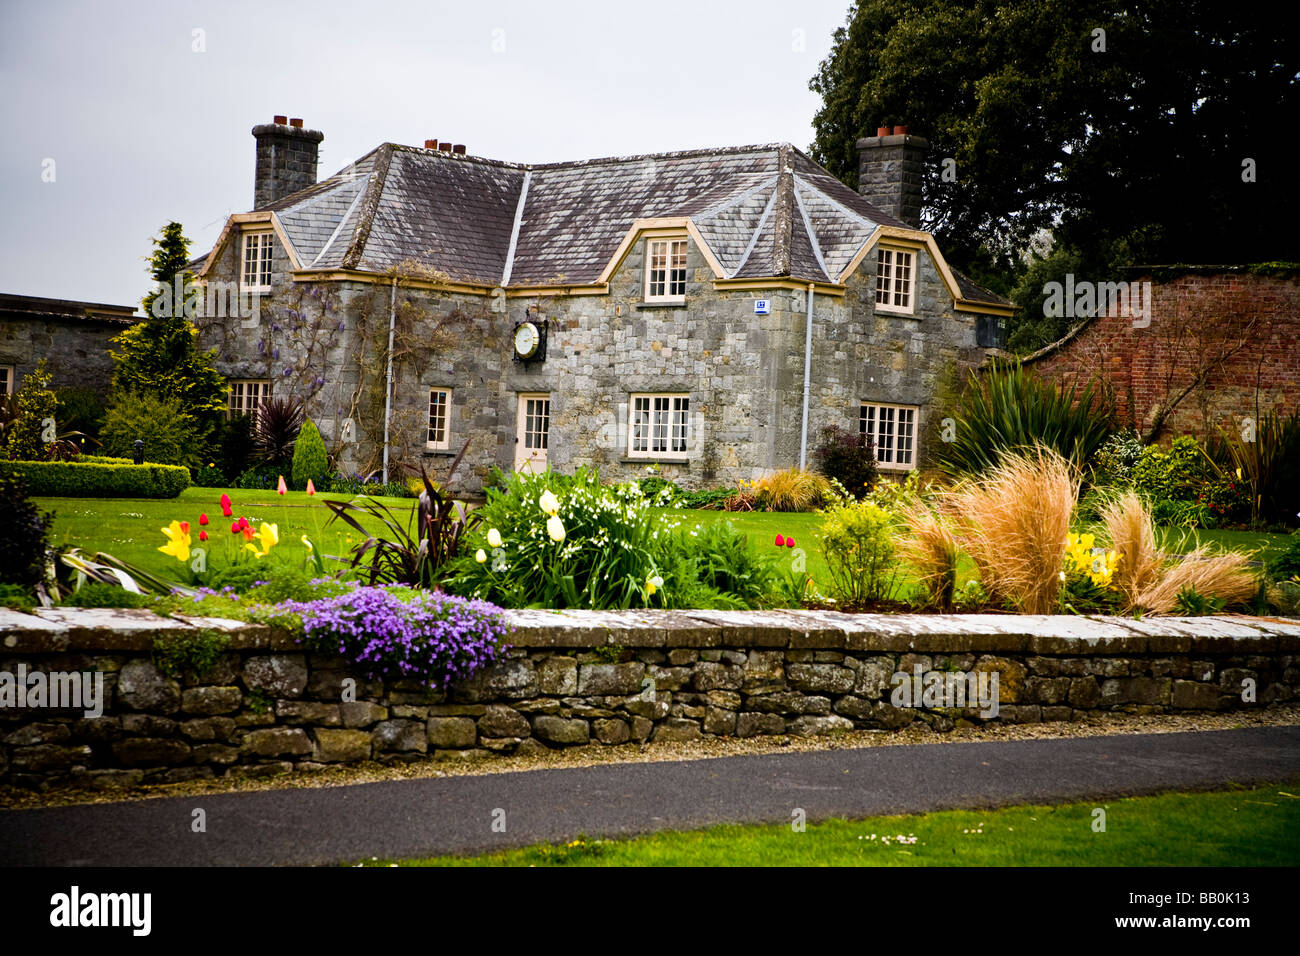 Golf house of Adare Manor house in County limerick Ireland showing landscaped gardens and walking paths Stock Photo